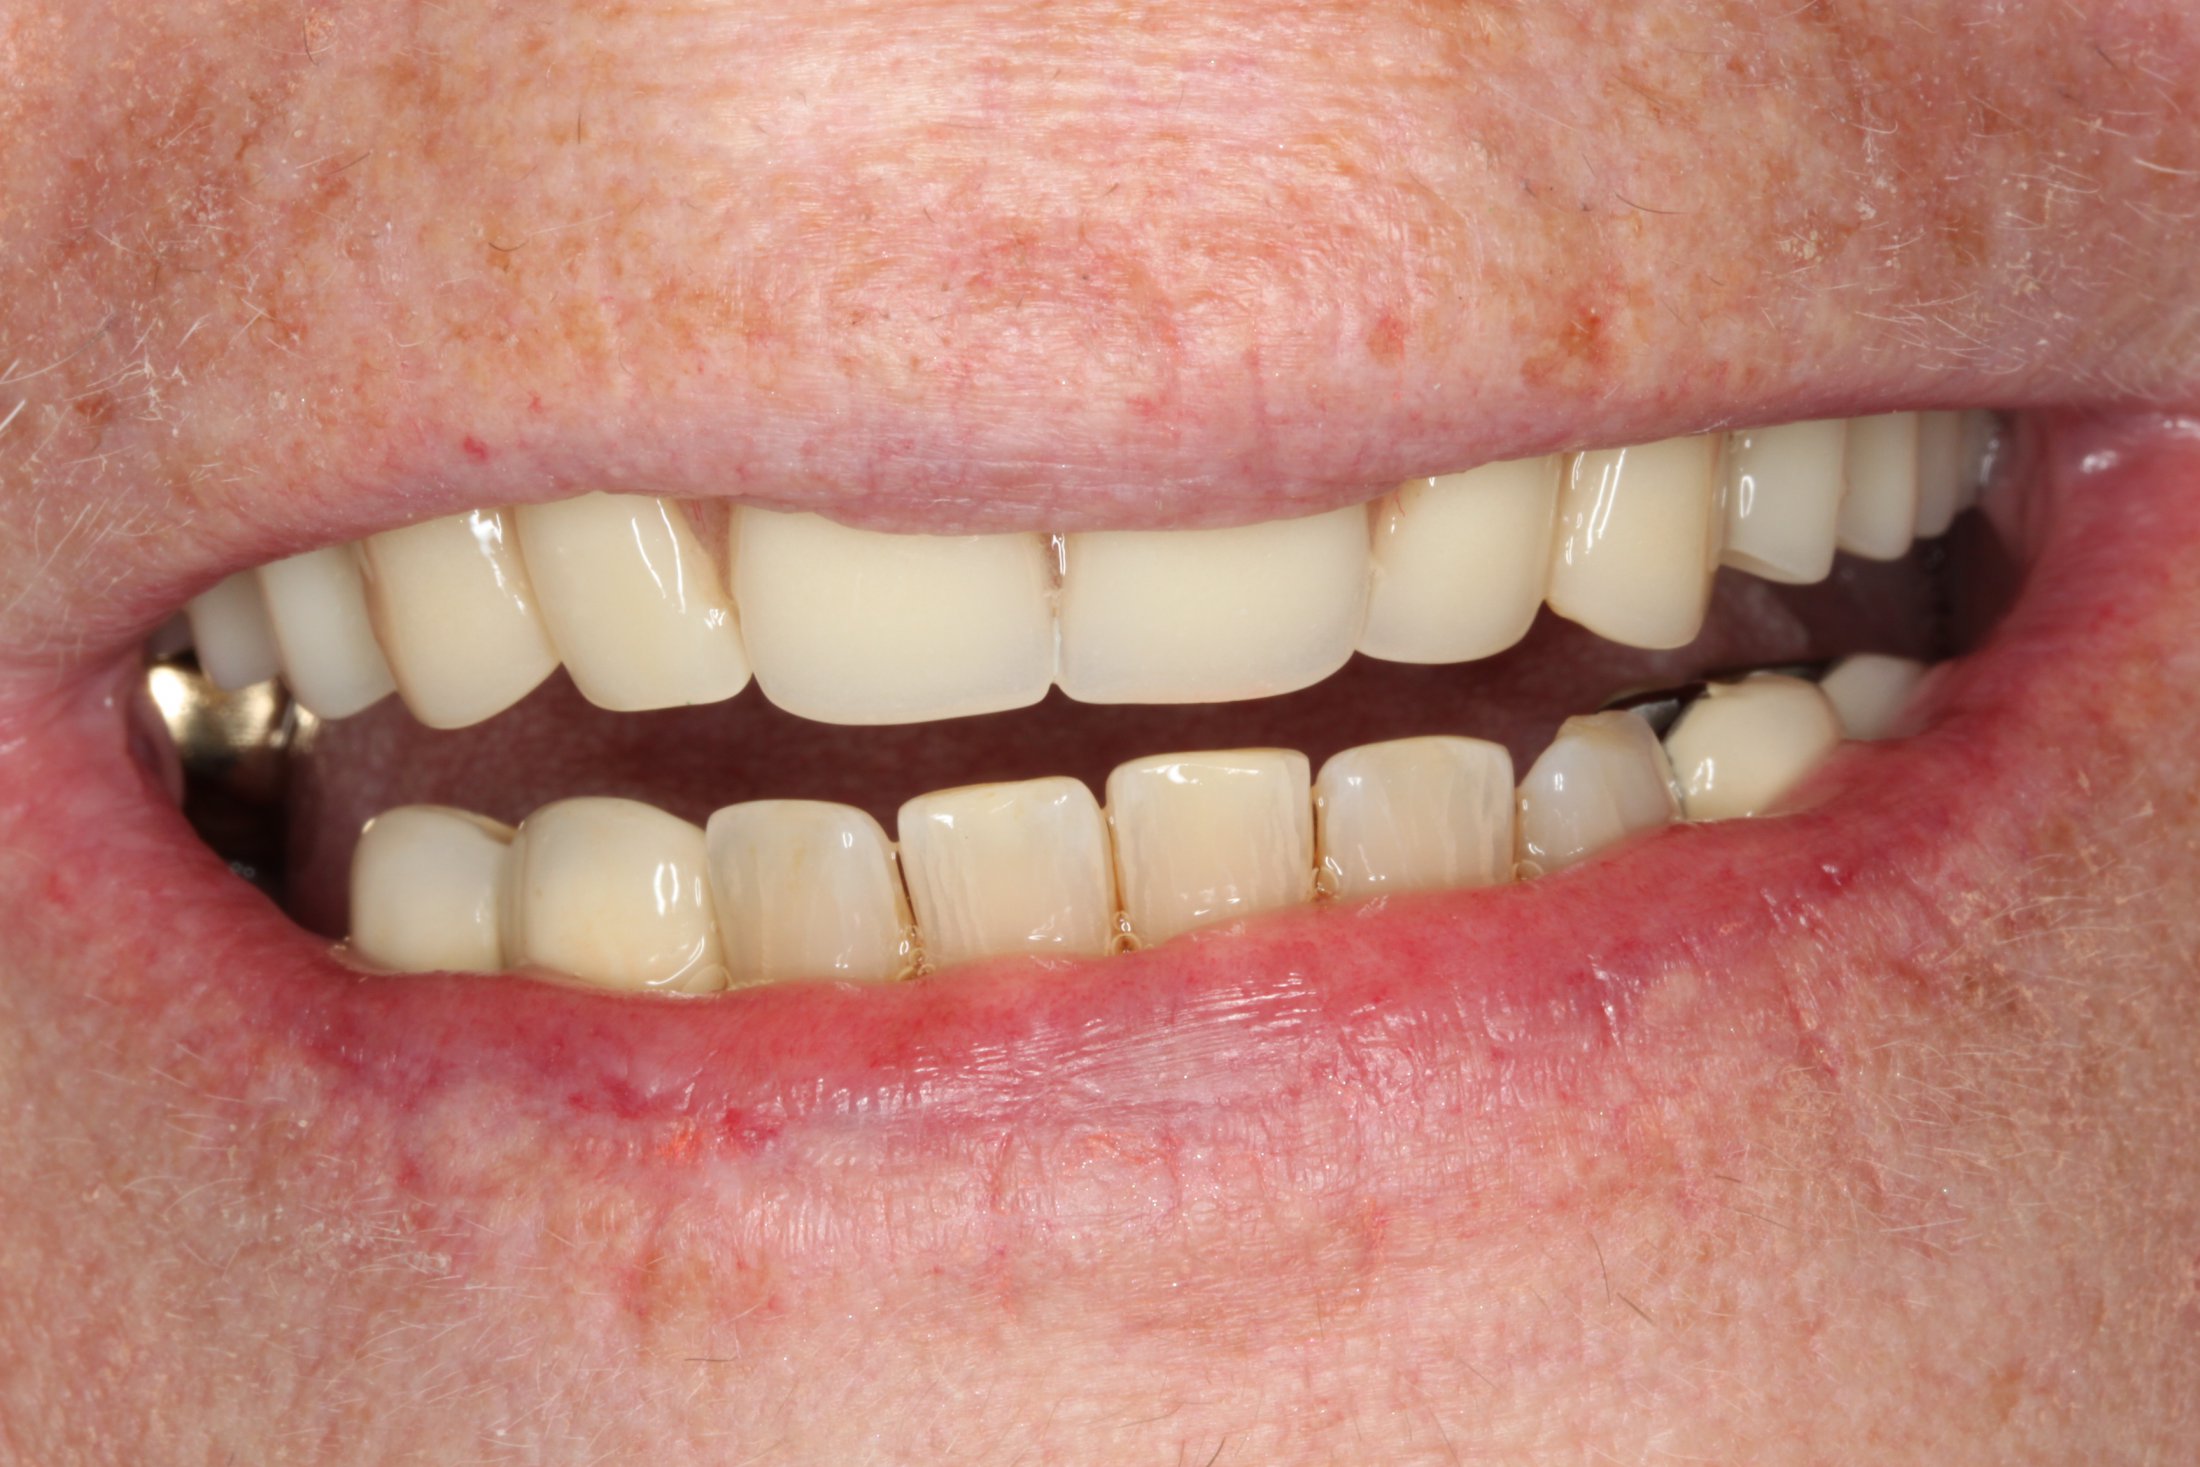 Teeth with fillings before a maxillary denture